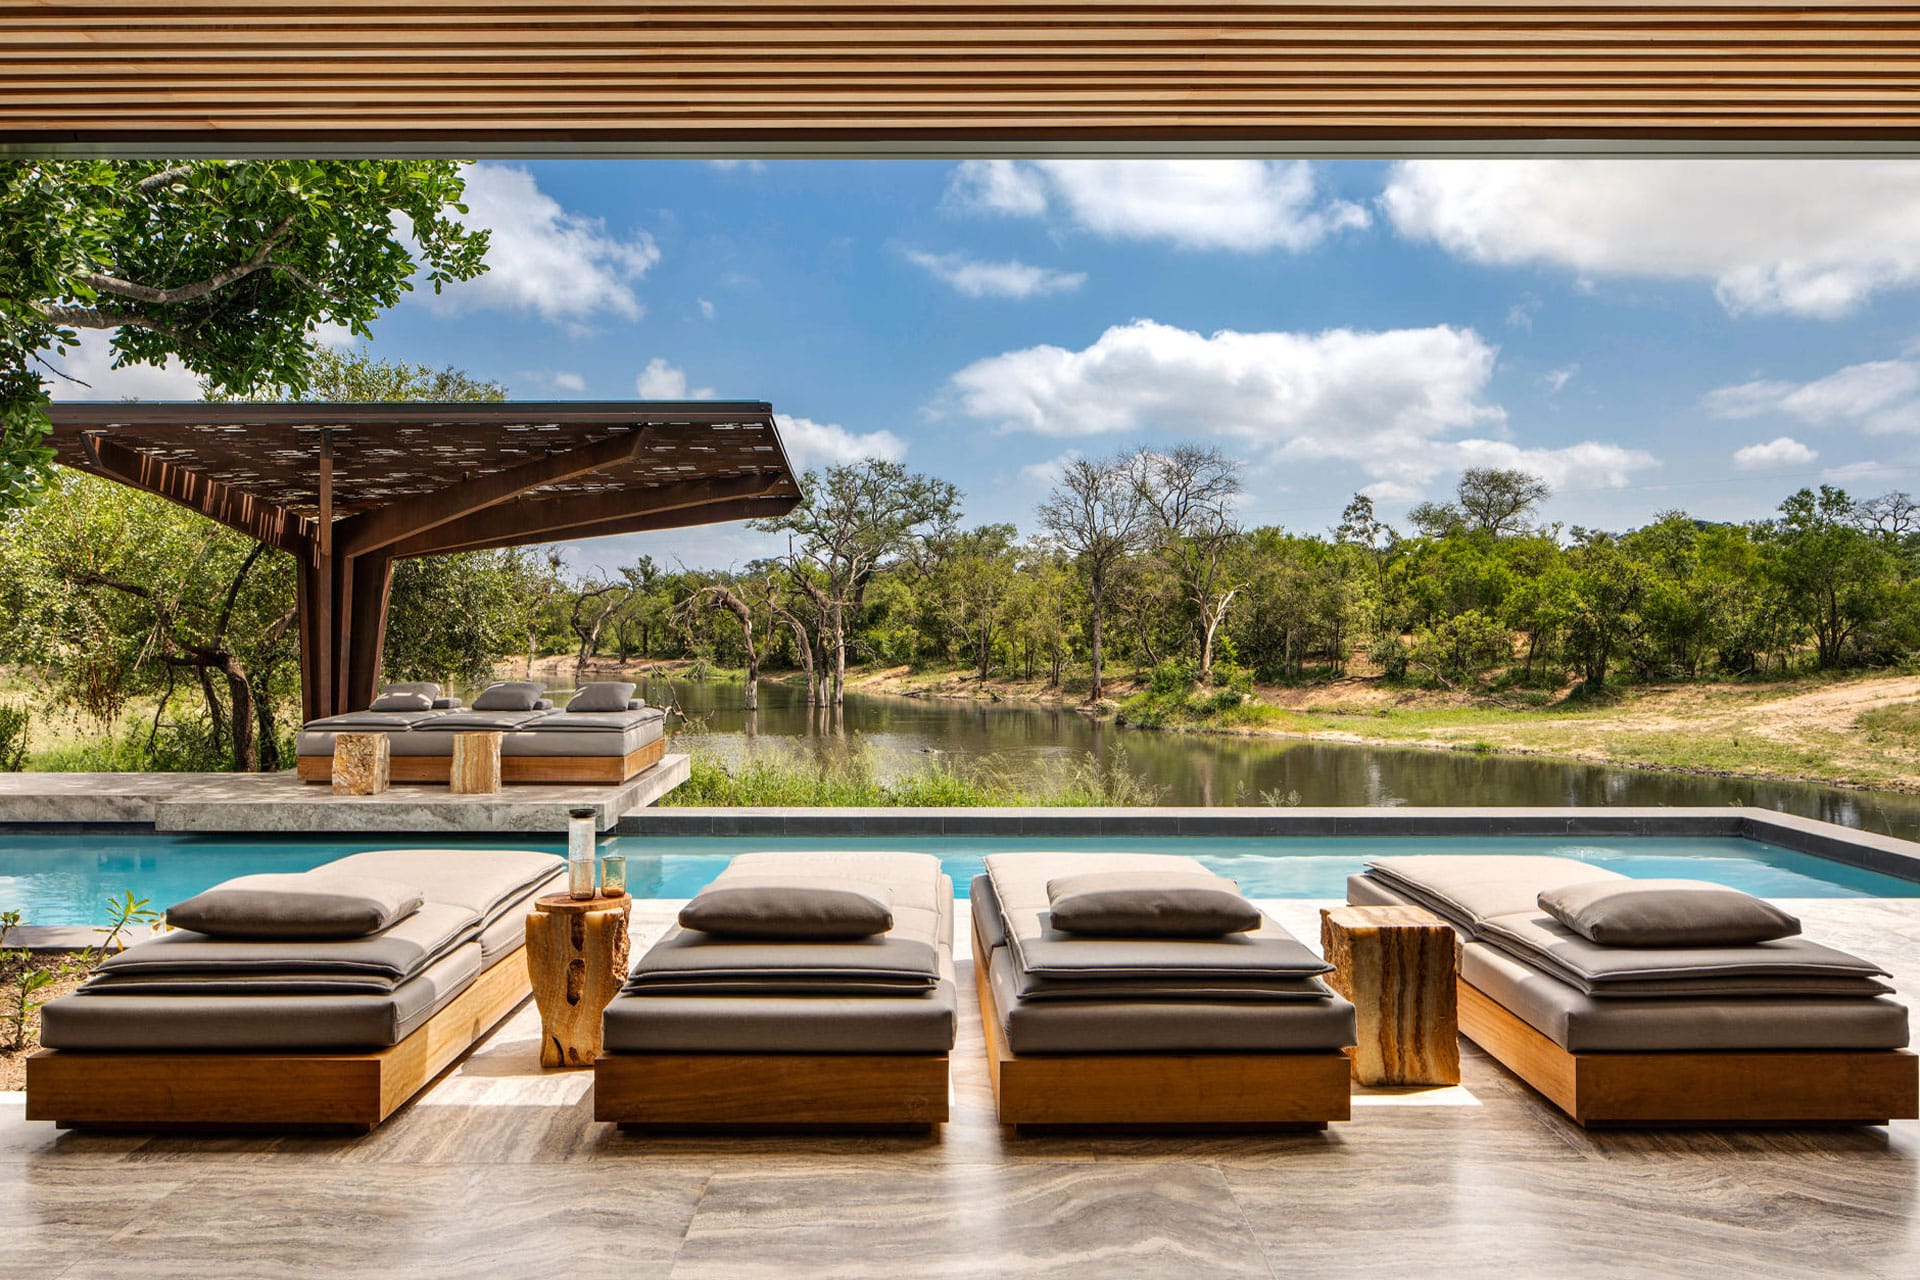 Pool and seating area on a deck with a view of the river at a villa at Cheetah Plains in the Sabi Sands Game Reserve.